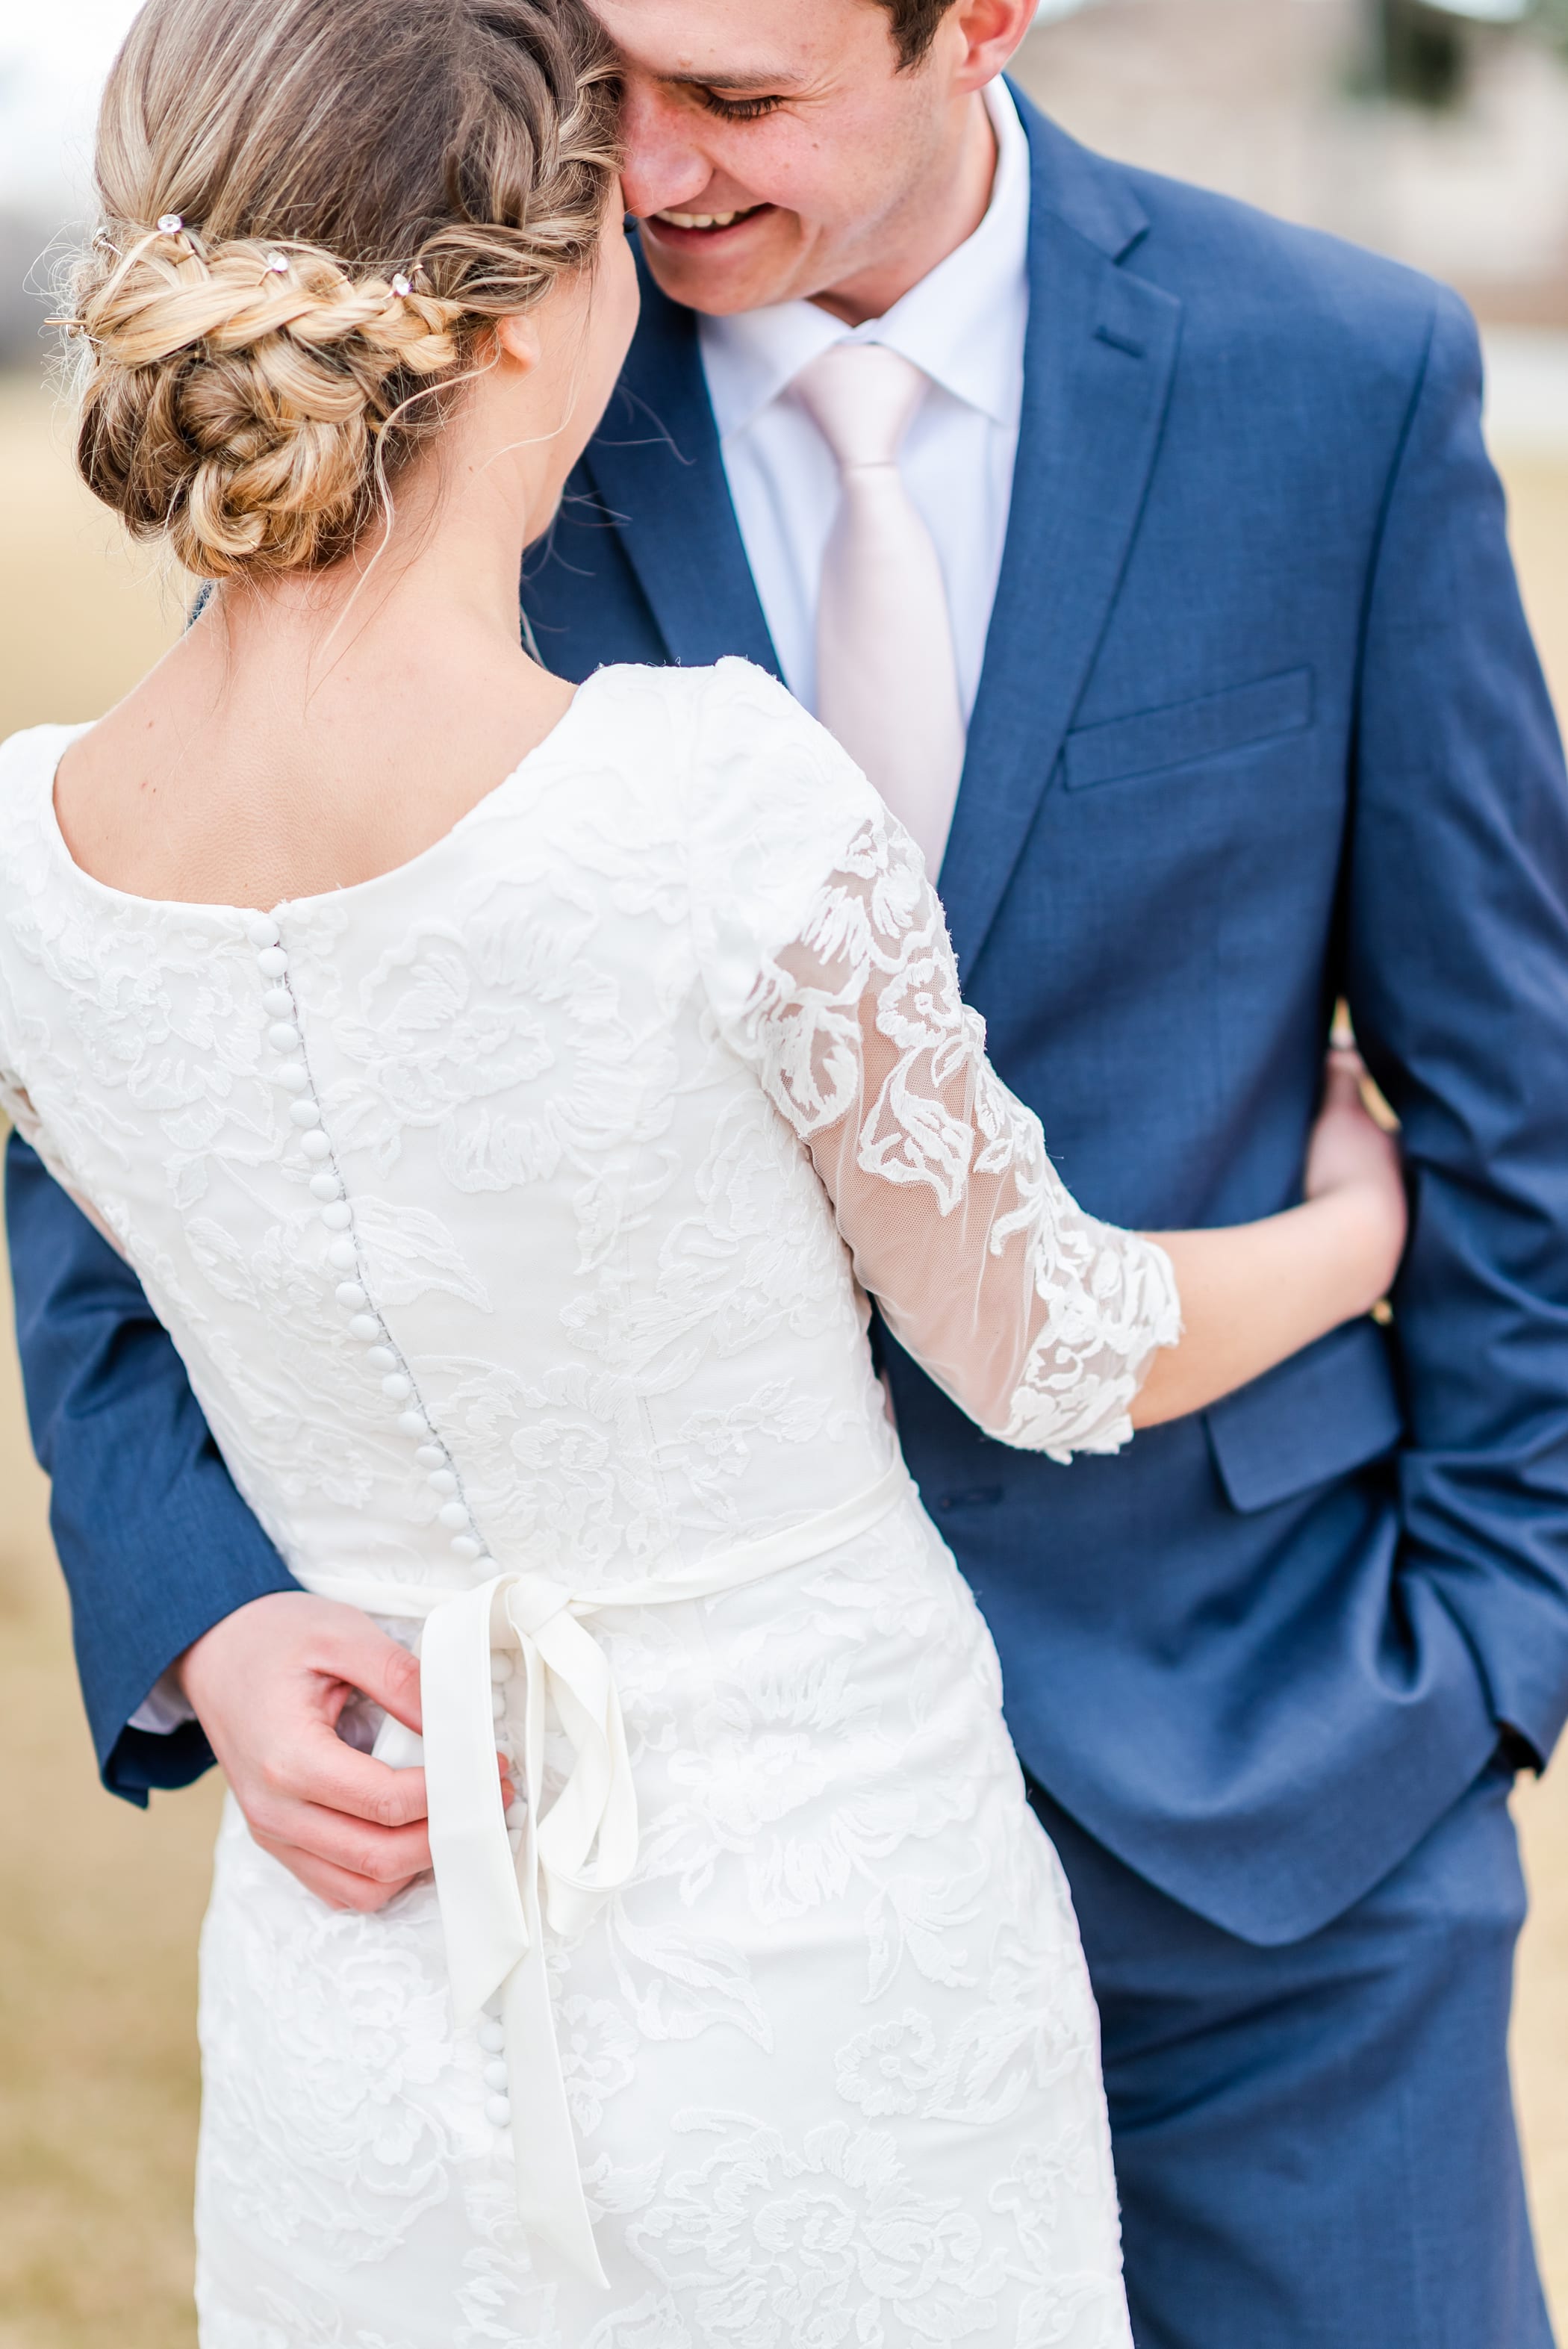 3/4 length lace sleeve wedding dress with navy suit